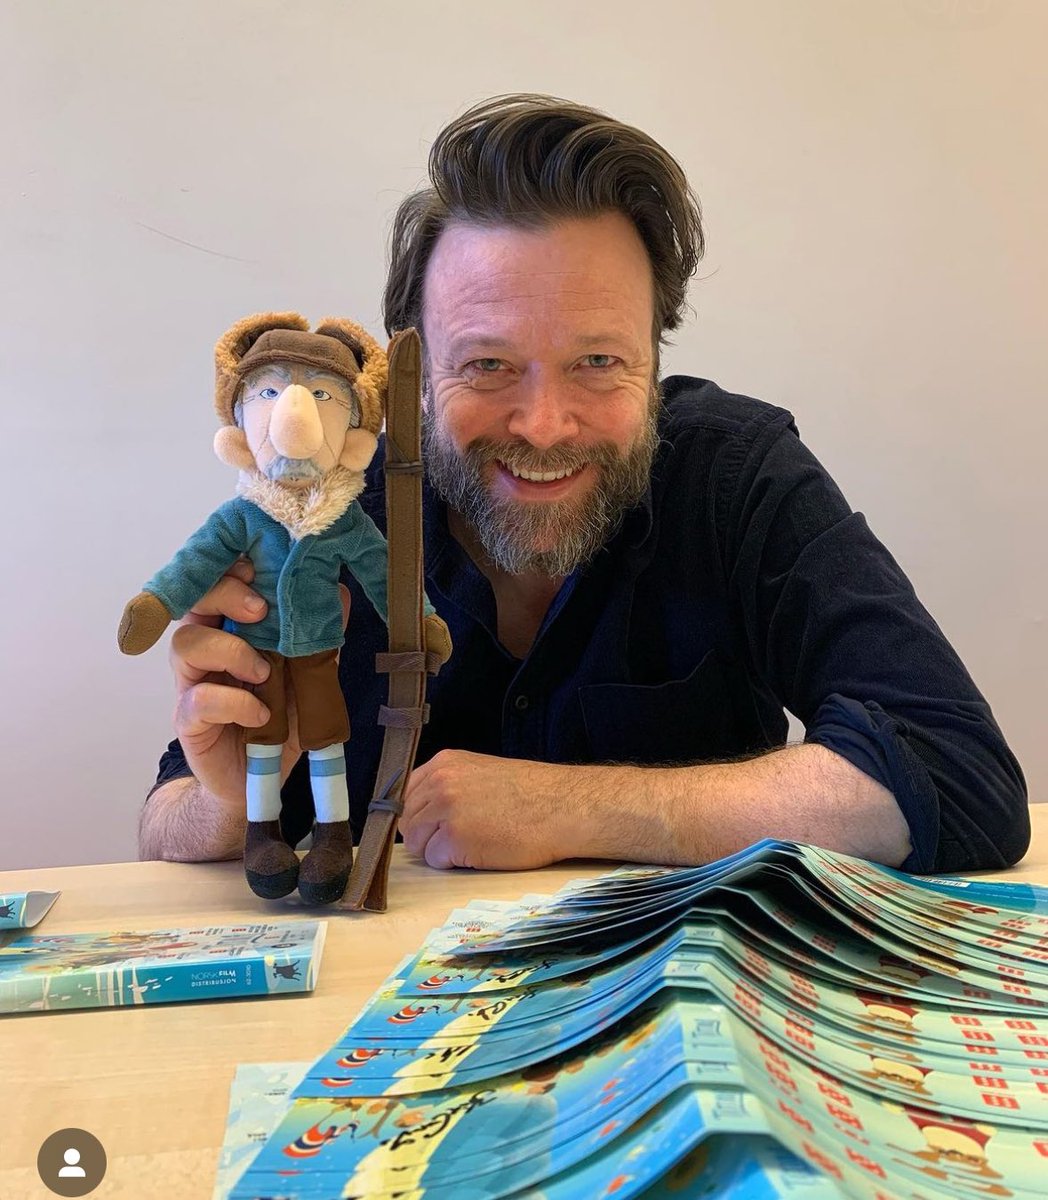 Little Roald is now available in our plush collection based on #RoaldAmundsen created by @Mikrofilm for the animated film #Titina. Here he can be seen with #KåreConradi - Amundsen in the film. Available in our webshop in our store and webshop from 13 Dec. #famousplushfigures